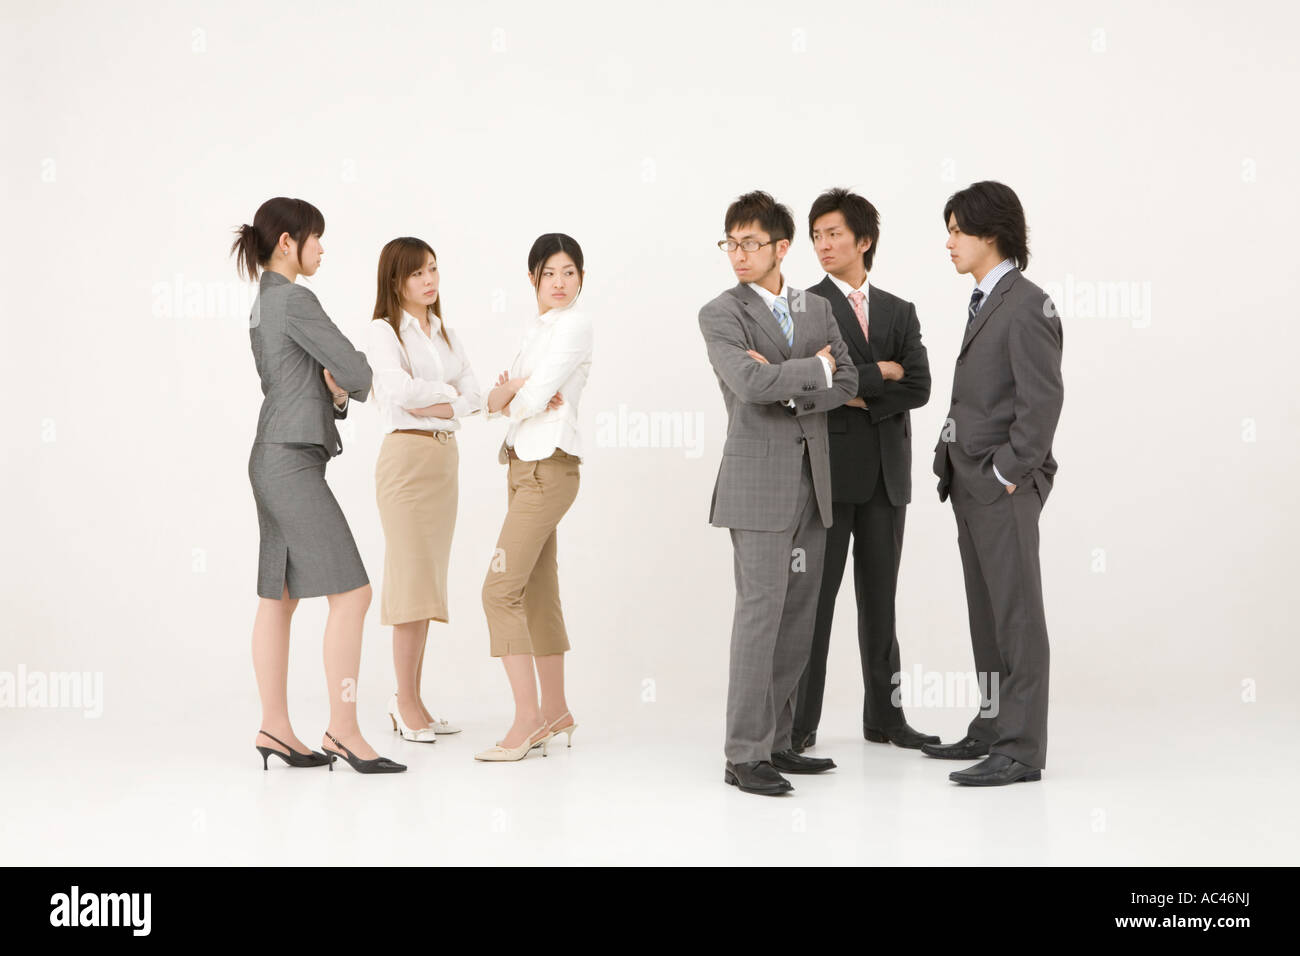 Business people glaring at each other Stock Photo